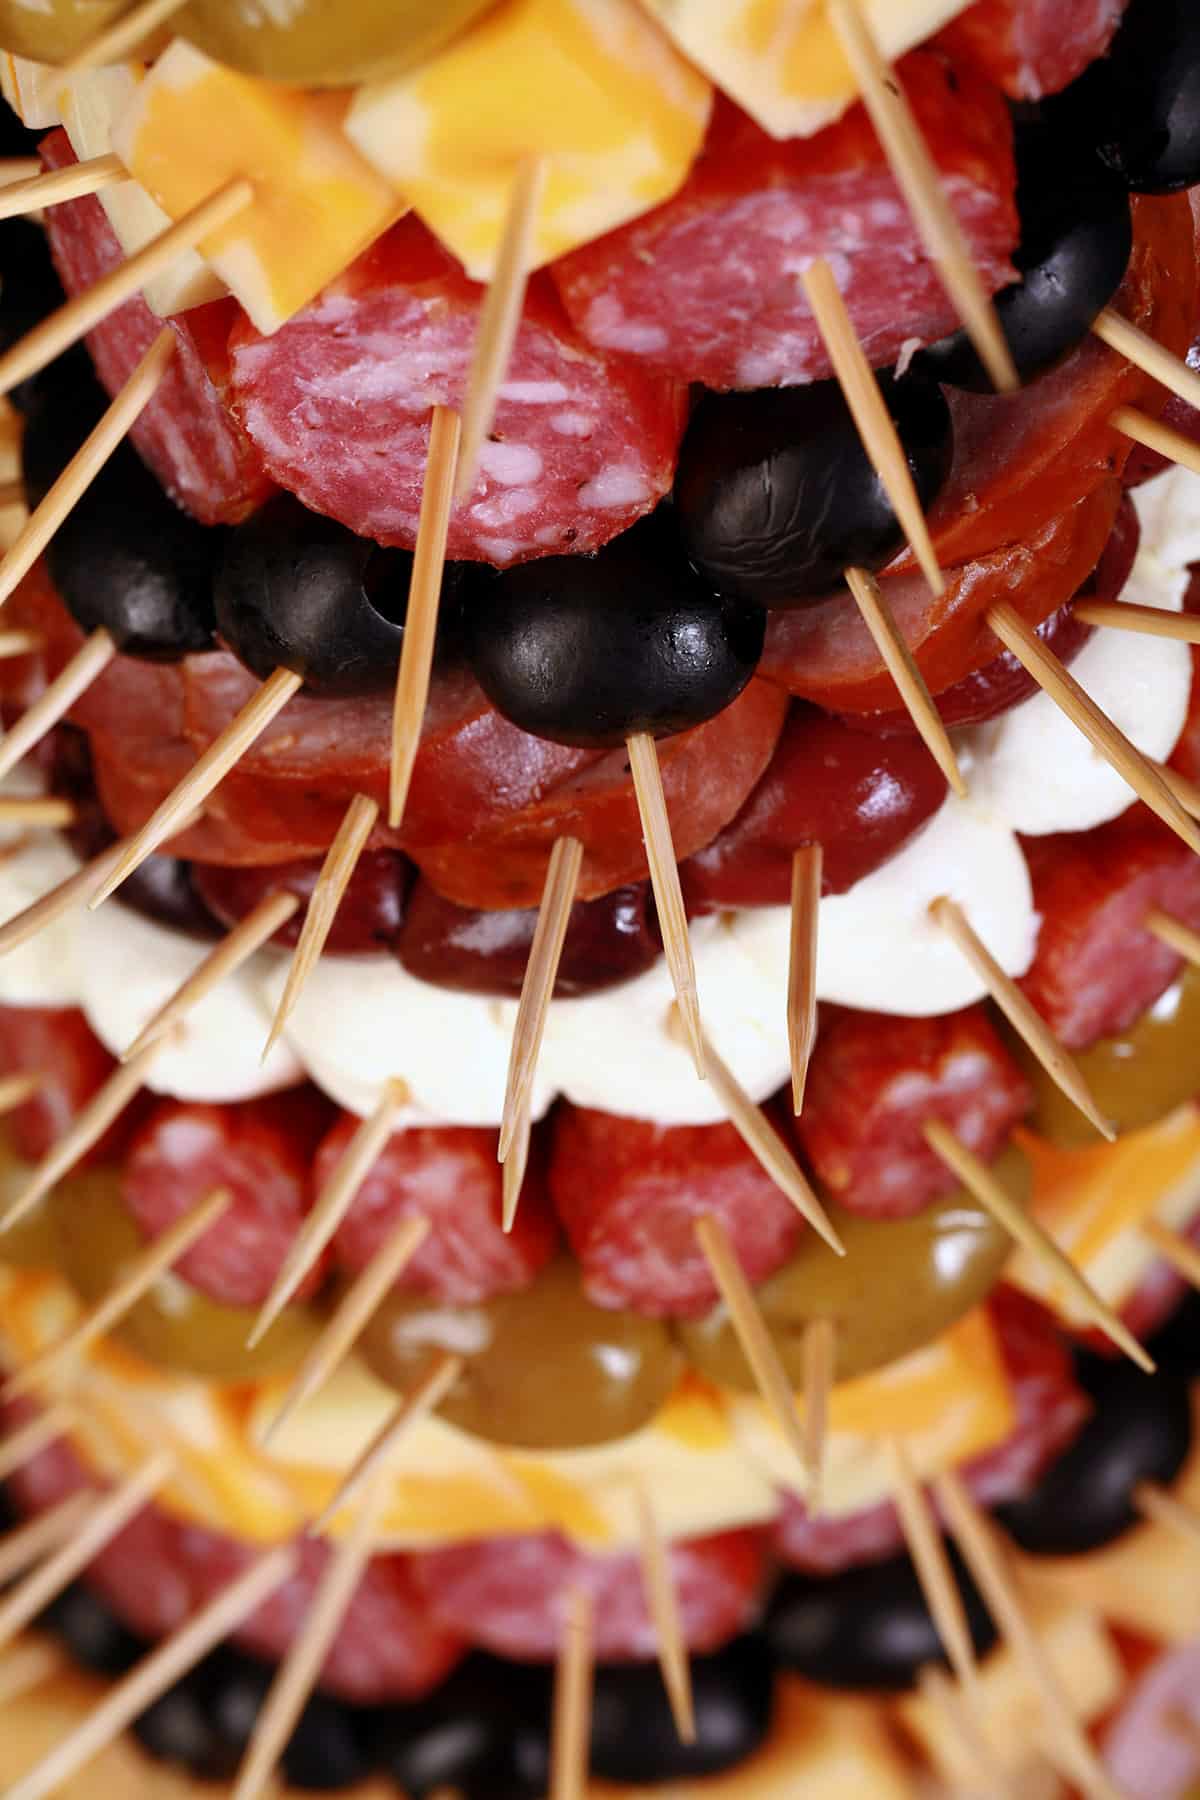 A close up view of the middle of the charcuterie christmas tree.